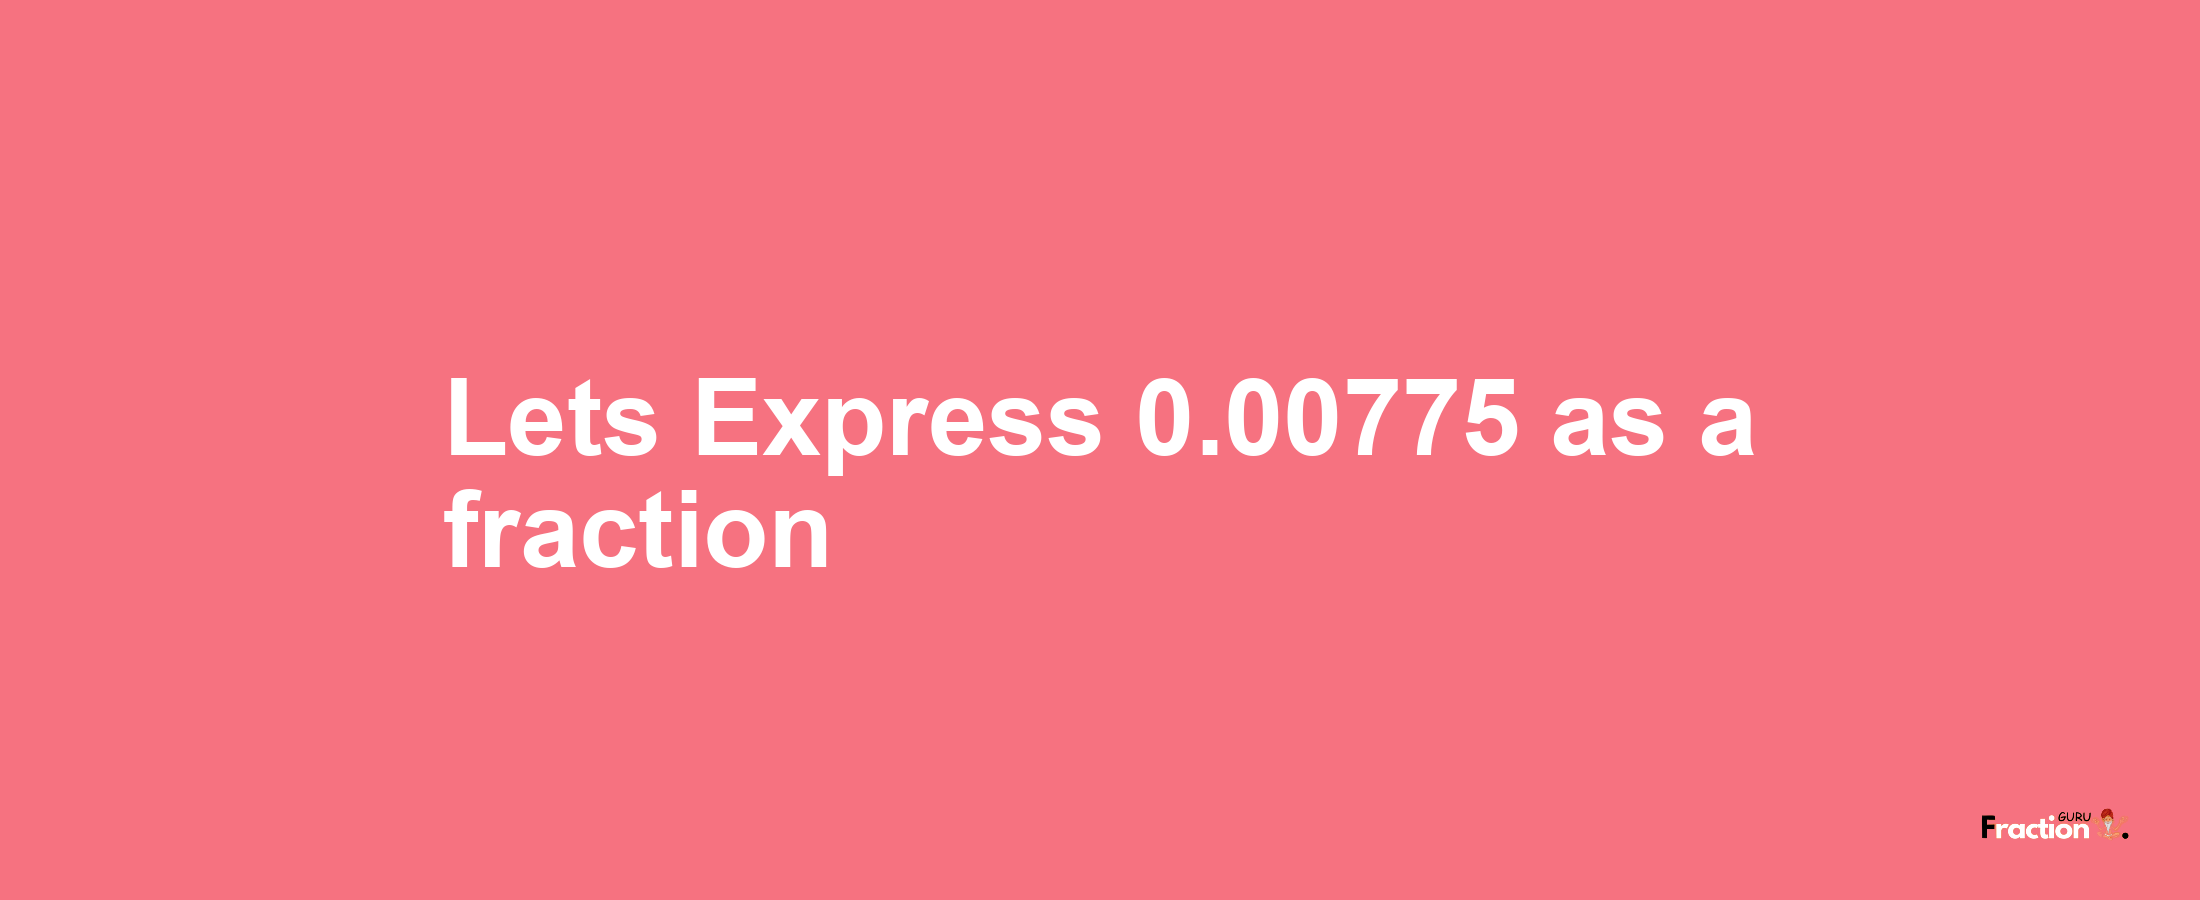 Lets Express 0.00775 as afraction